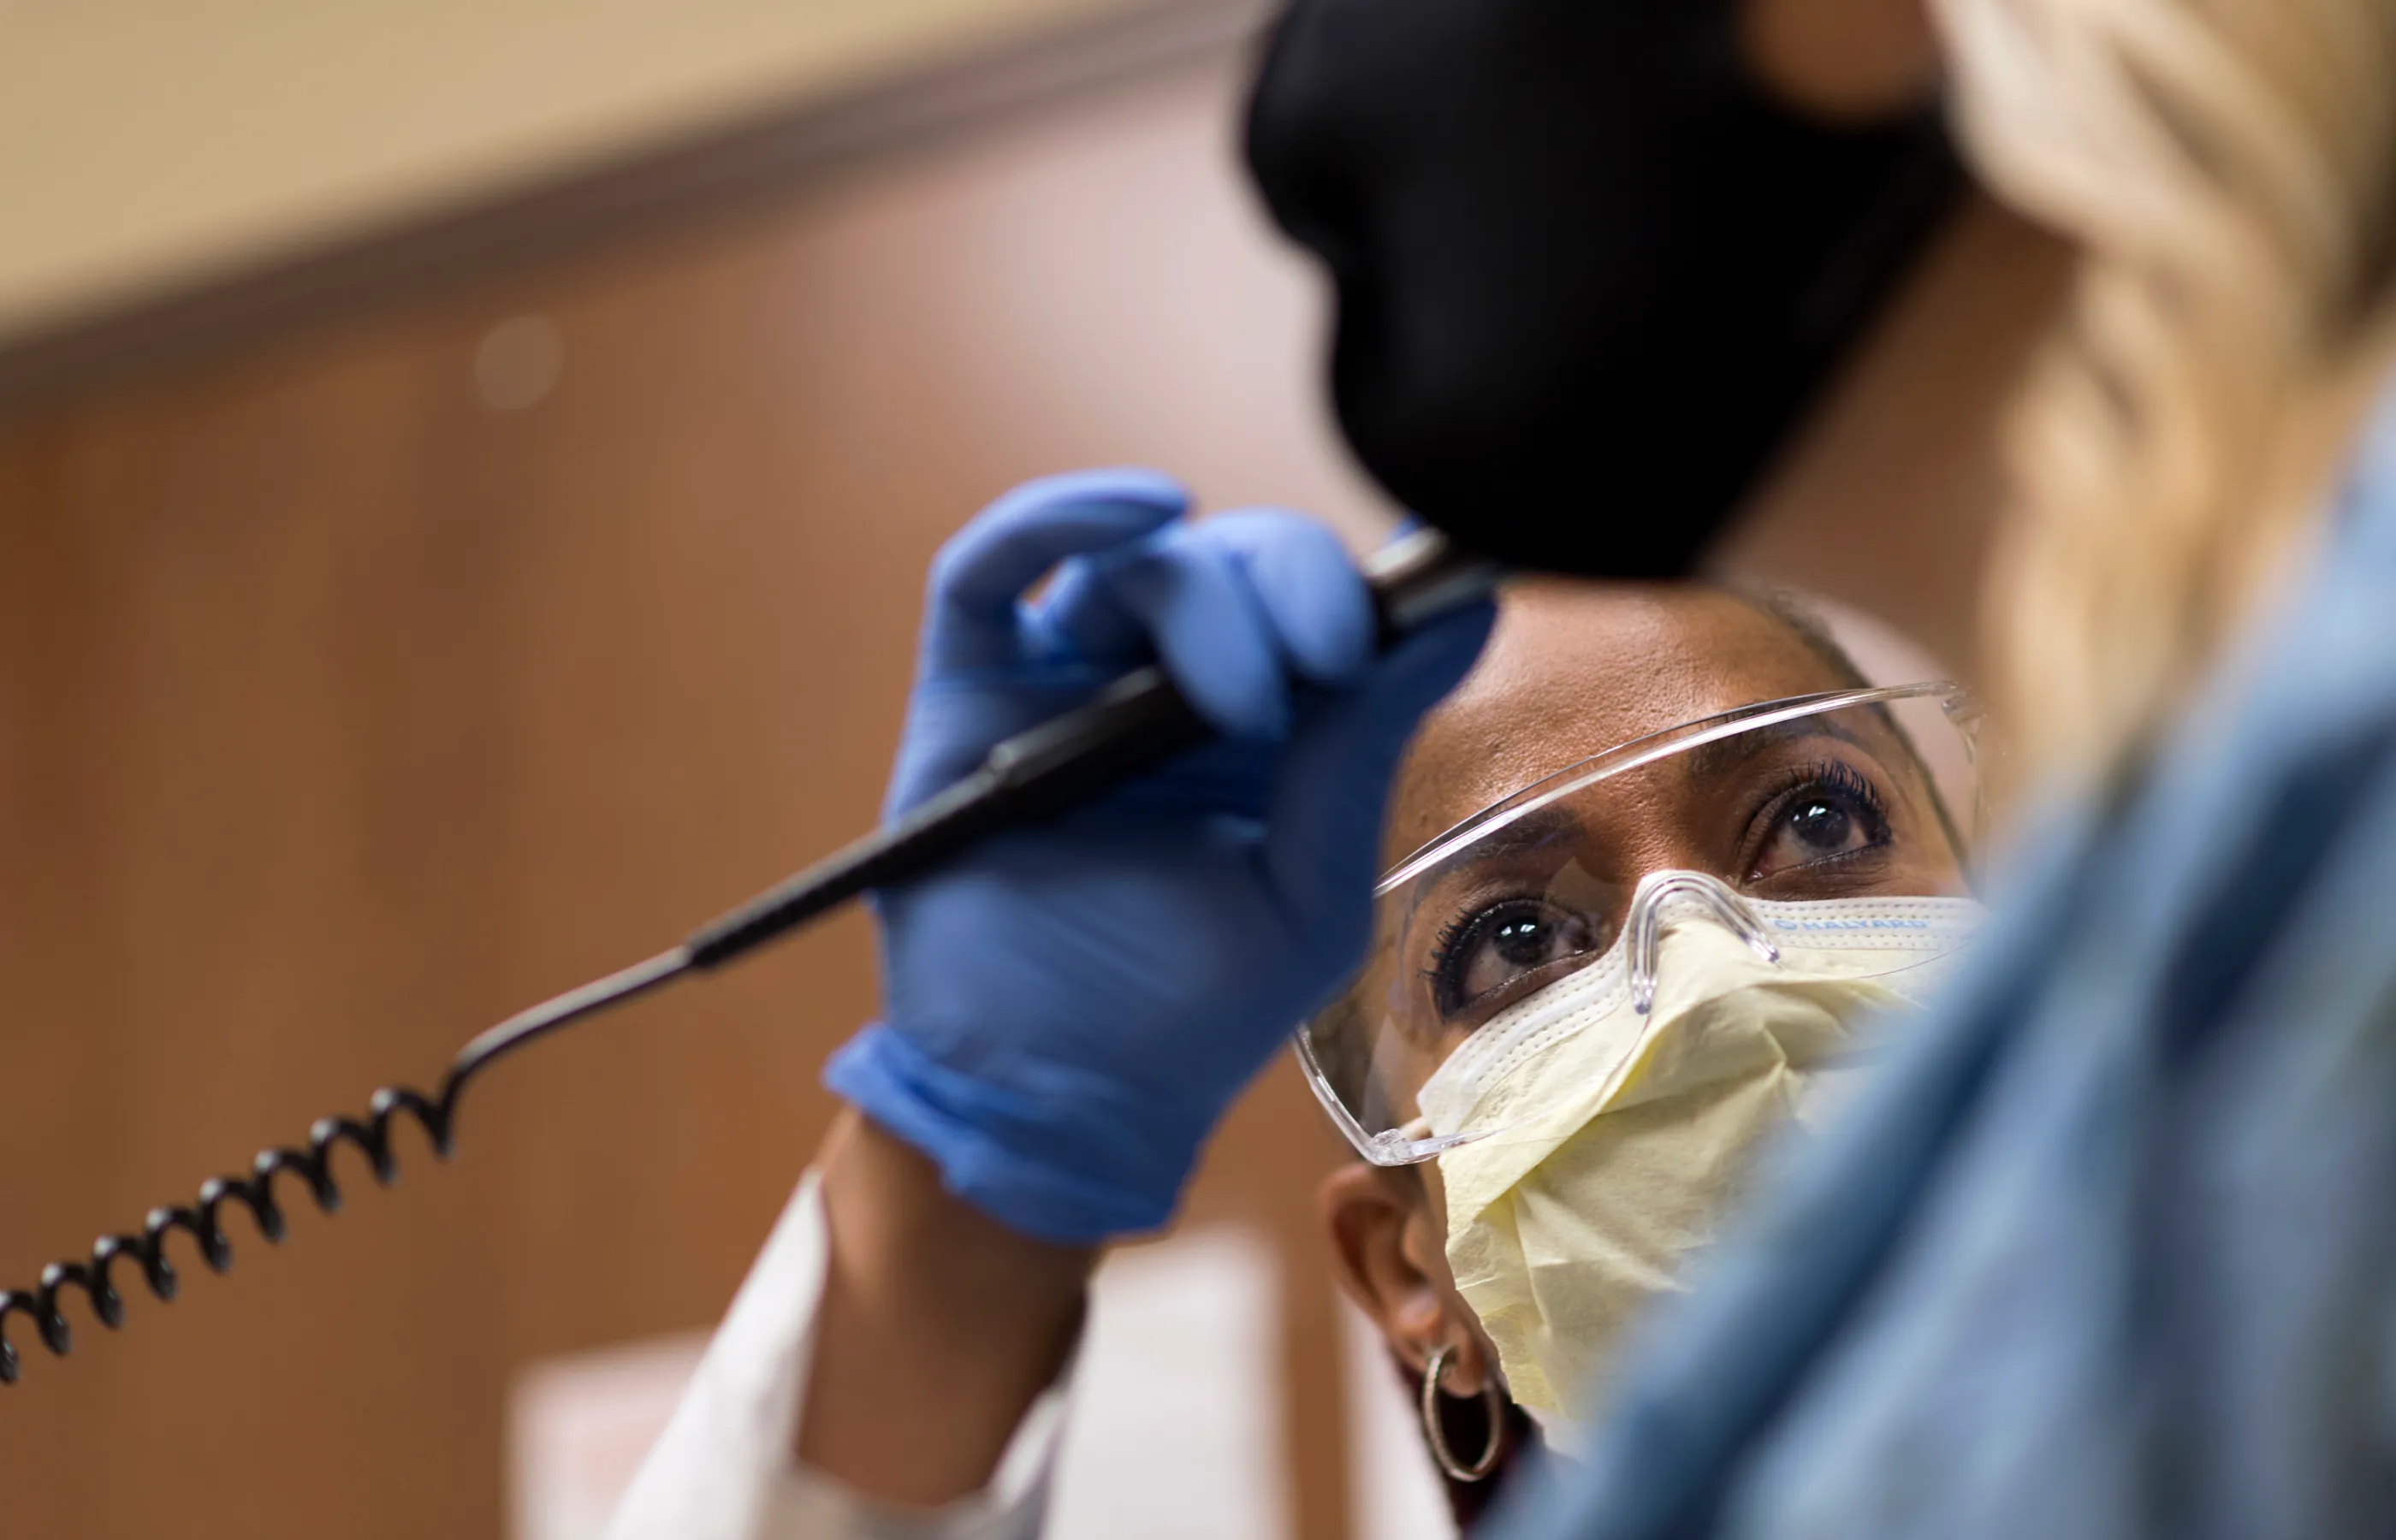 A masked Novant Health doctor is evaluating a patient's ear with a scope and light.